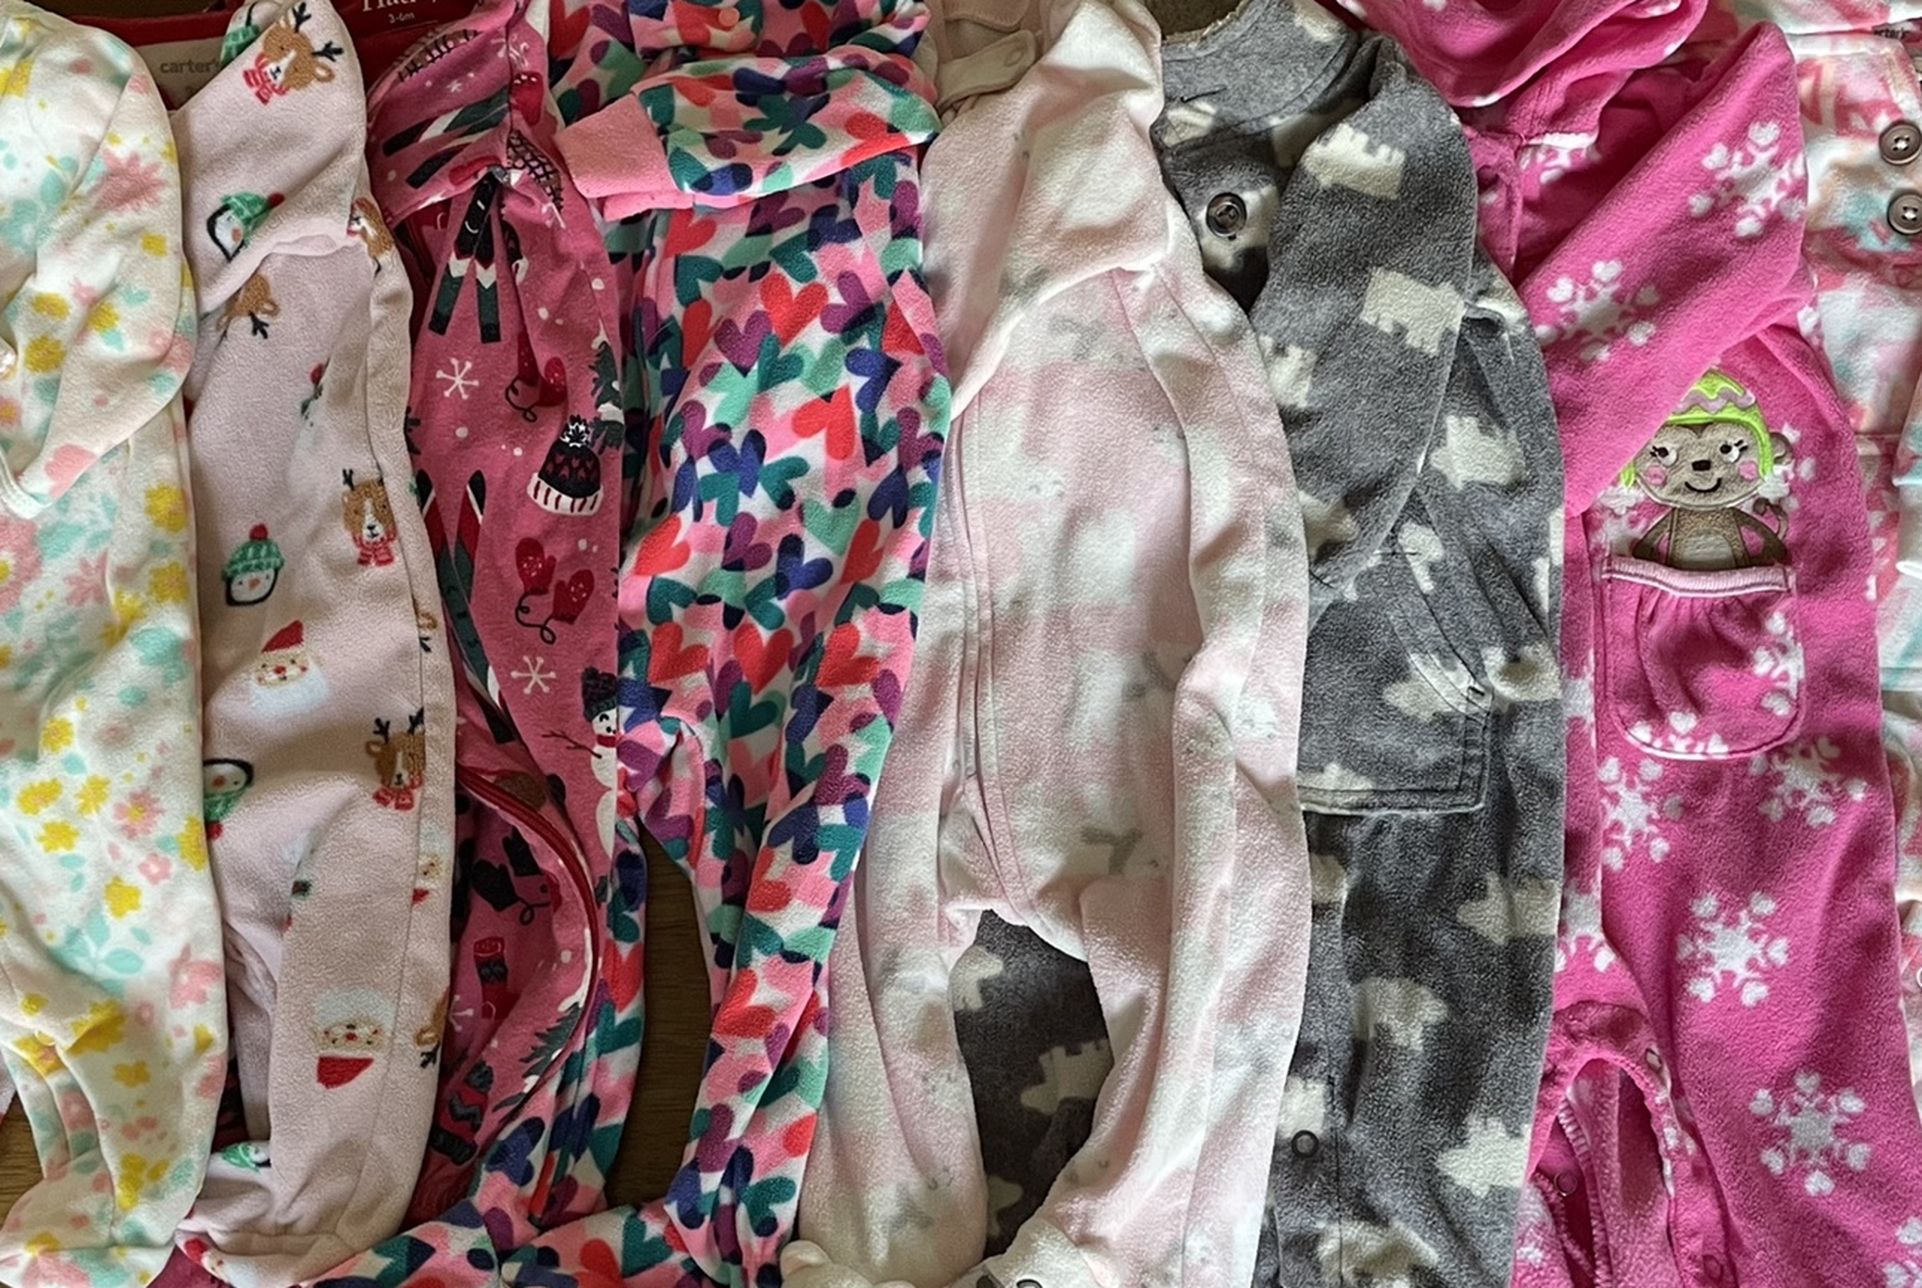 Baby Girls Clothes Clothing Lot 3 6 9 Months Carter’s Sleepers Outfits